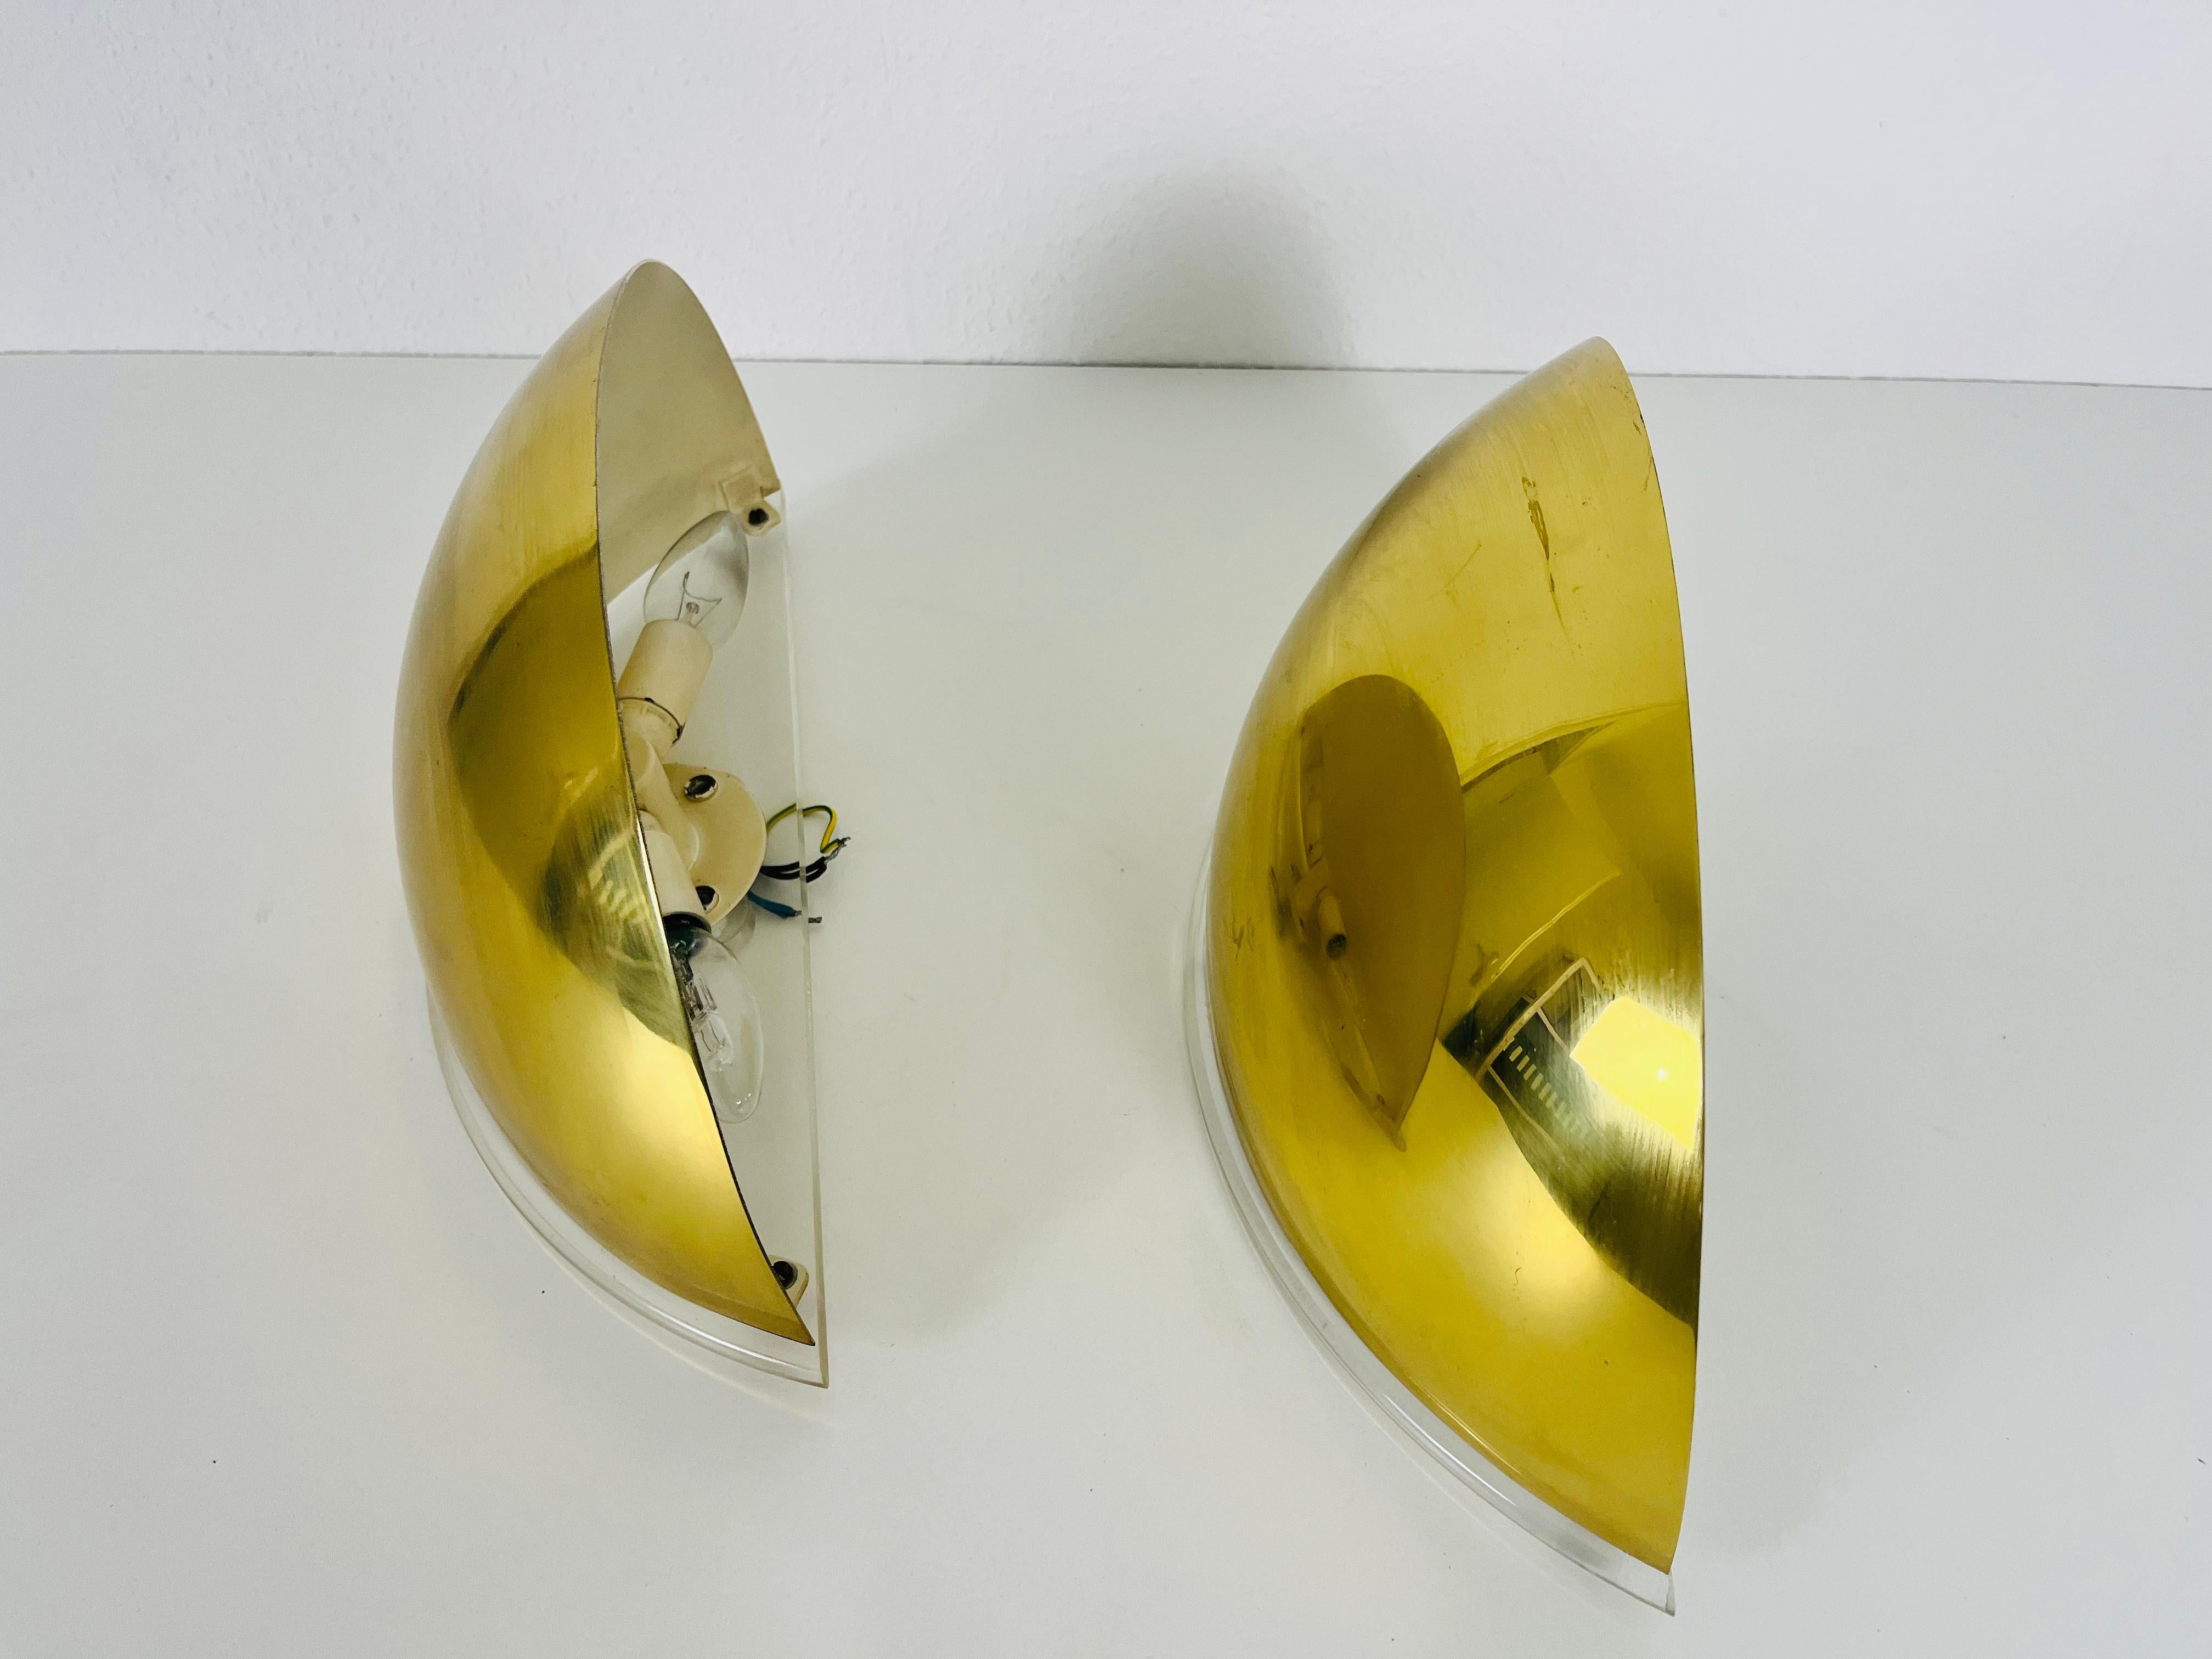 Pair of Florian Schulz Midcentury Brass Wall Lamps, 1970s For Sale 2